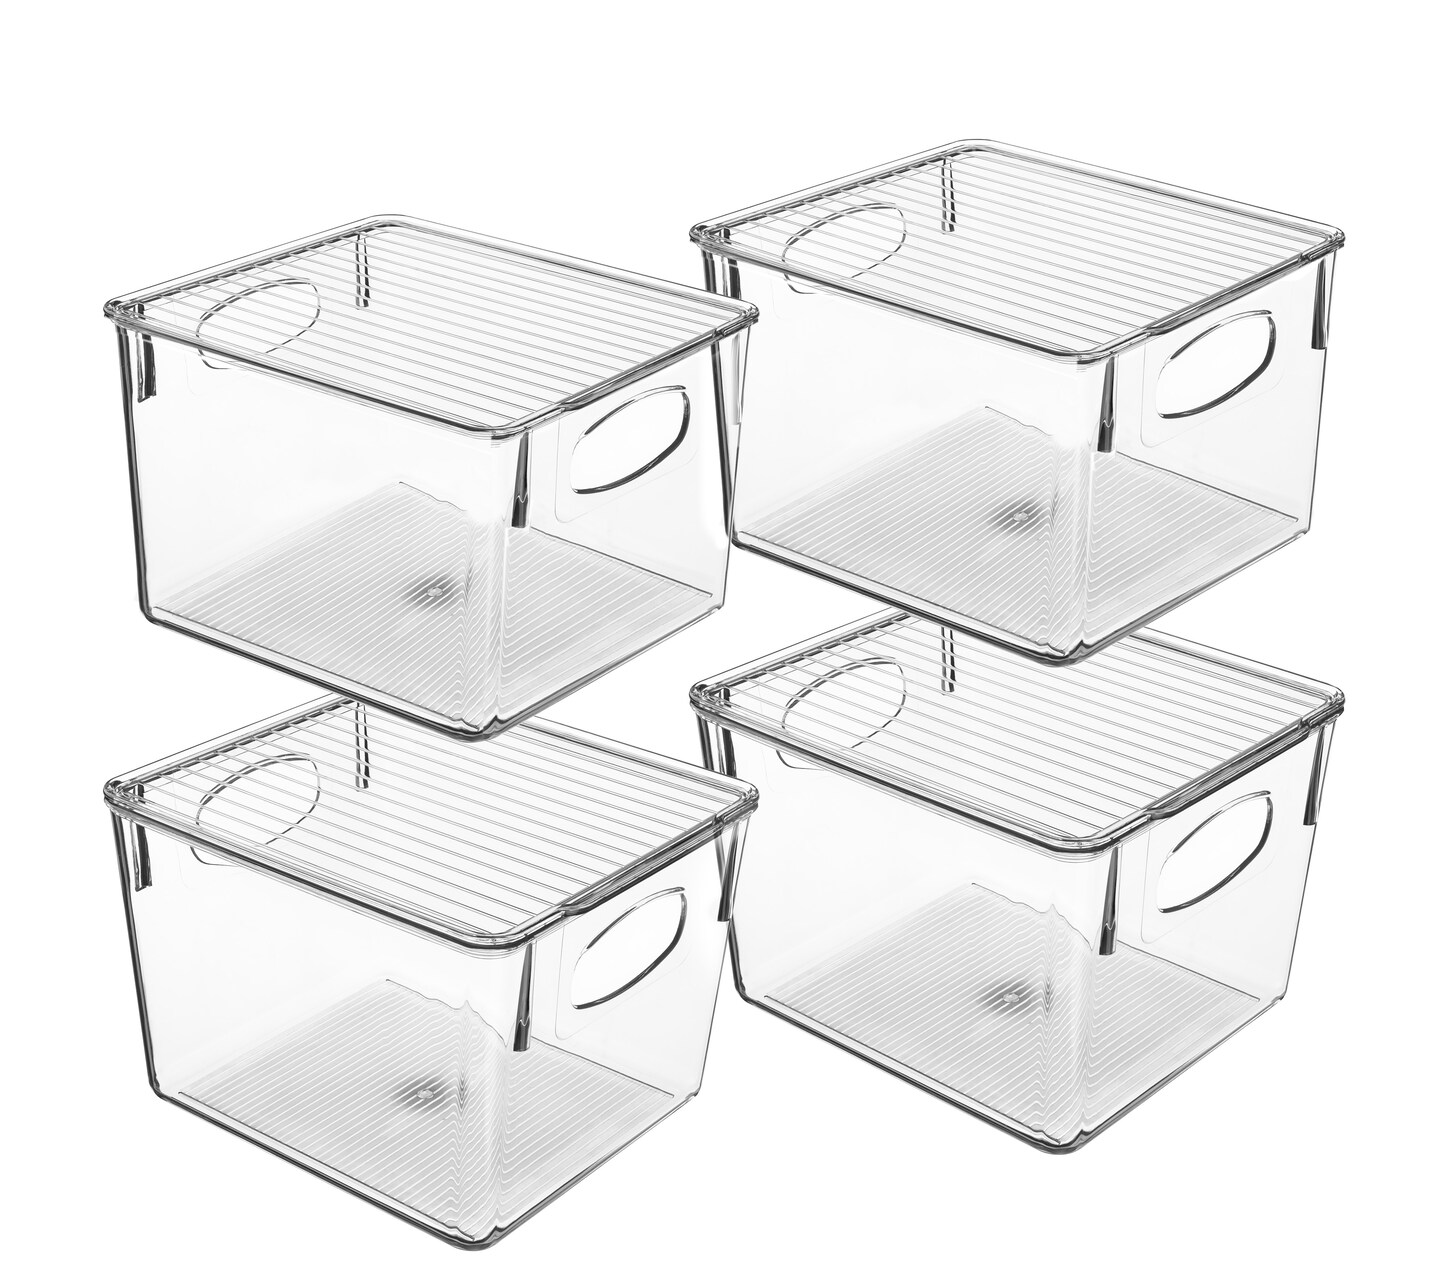 Sorbus Medium Plastic Storage Bins with Lids - for Kitchen Organization, Pantry Organizers and Storage, Fridge Organizer, Cabinet Organizer, Refrigerator Organizer Bins - Clear Storage Bins (4 pack)